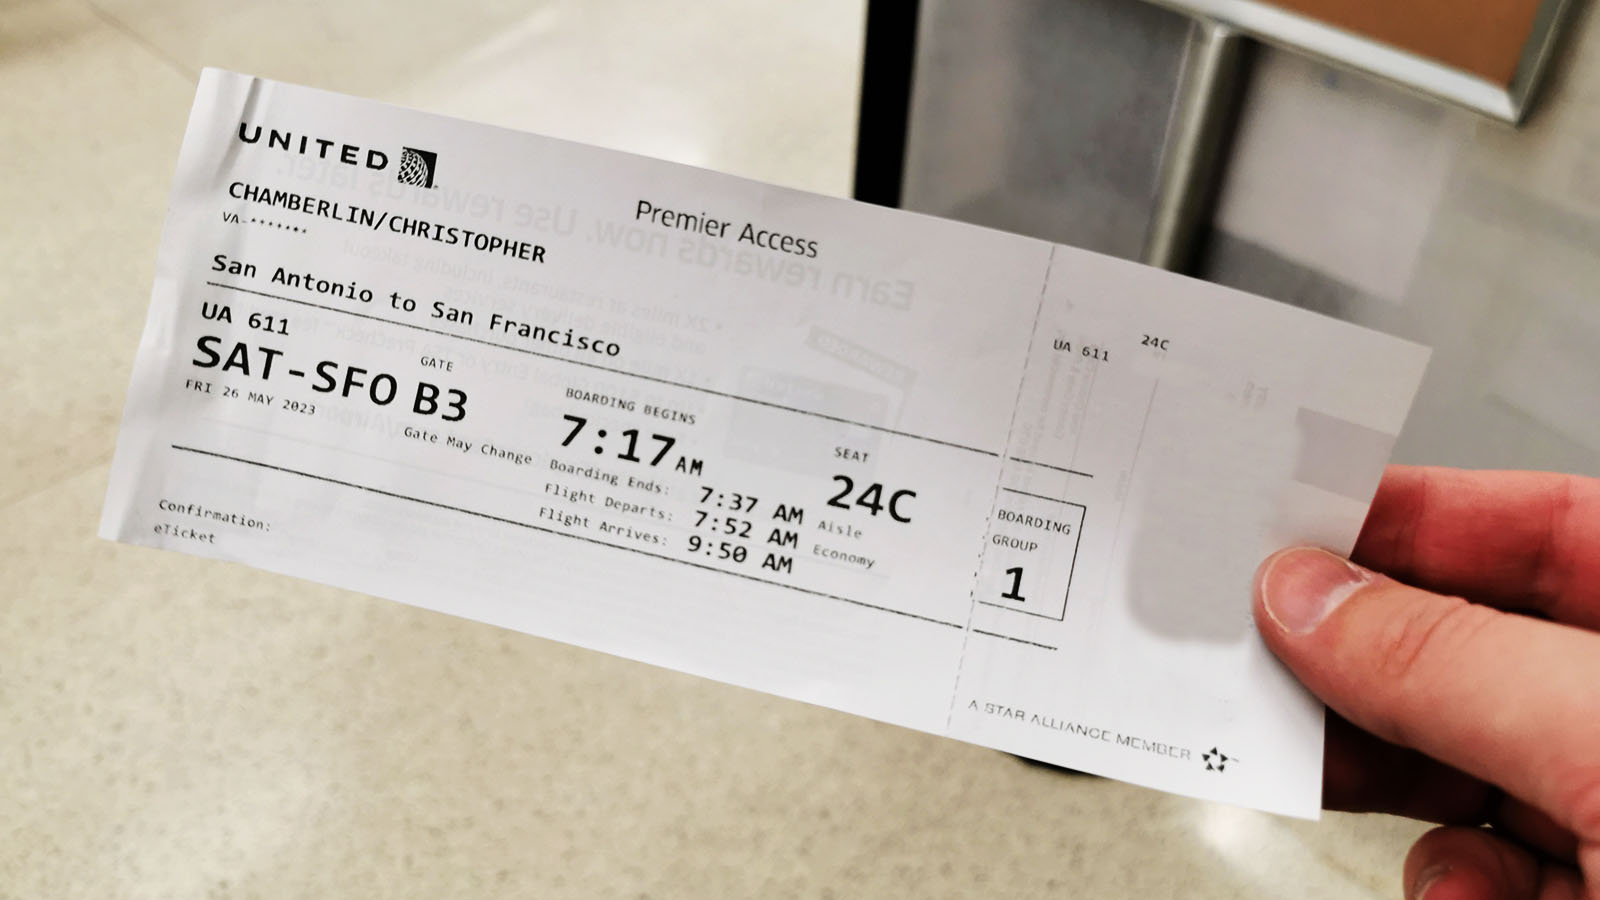 Boarding pass for United Airlines with group 1 boarding